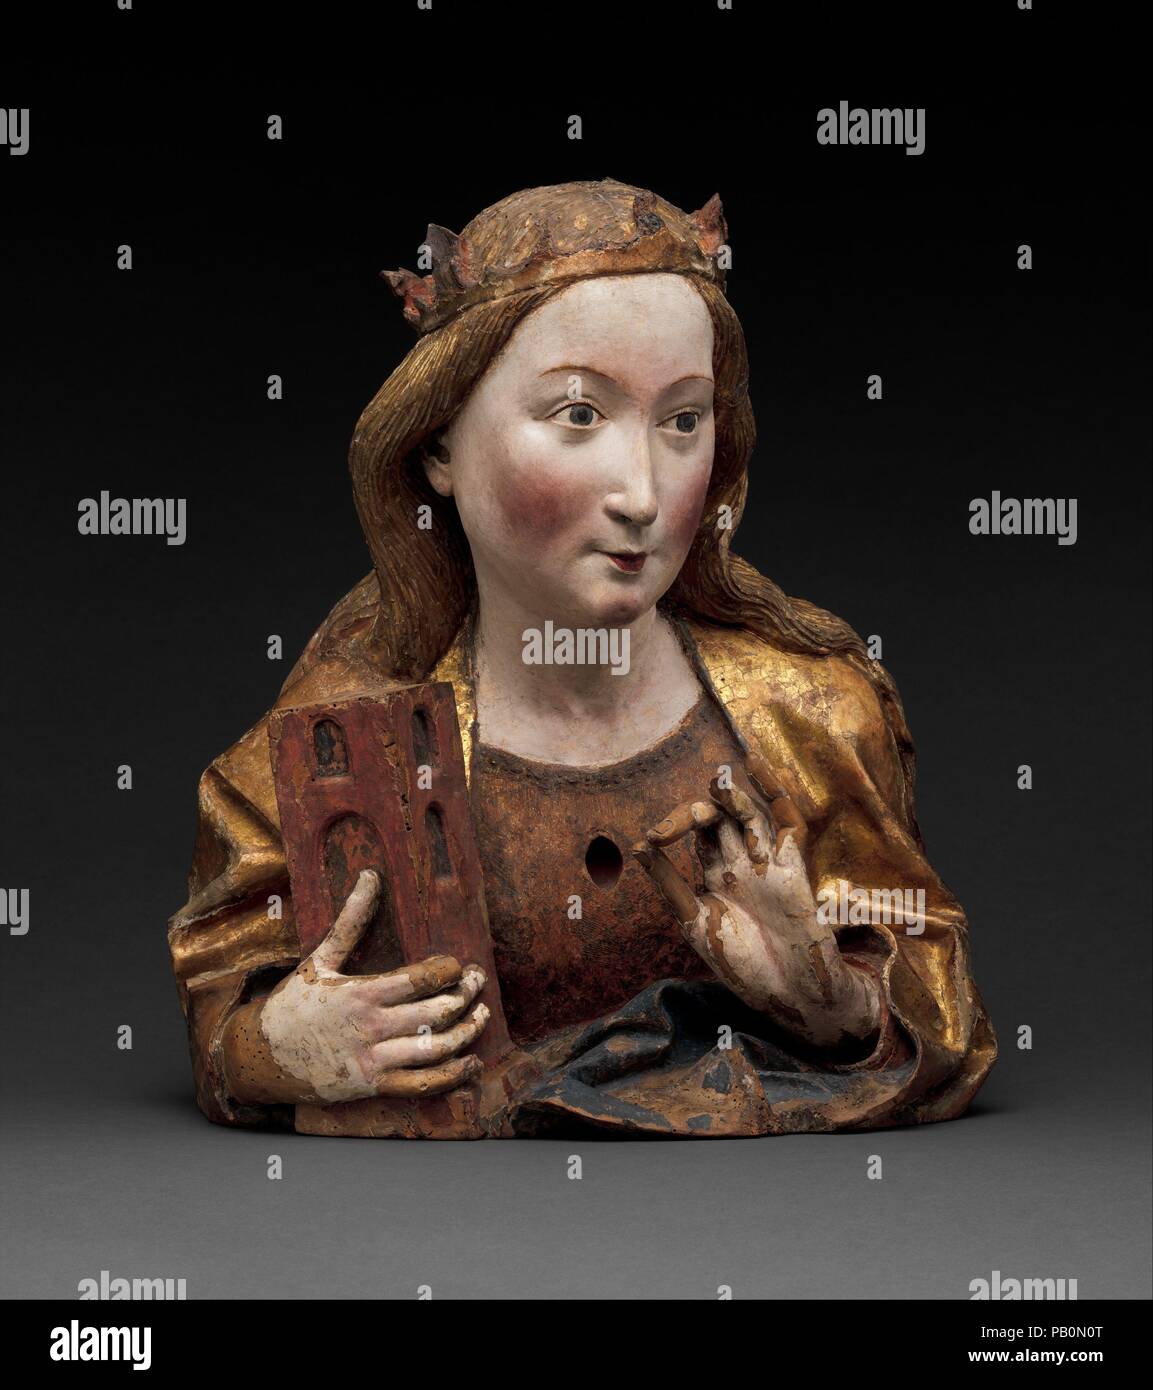 Reliquary Bust of Saint Barbara. Artist: Workshop of Niclaus Gerhaert von Leyden (North Netherlandish, active Strasbourg, ca. 1462-died 1473 Vienna). Culture: German. Dimensions: Overall: 19 7/8 x 17 1/2 x 10 7/8 in. (50.5 x 44.5 x 27.6 cm). Date: ca. 1465.  This bust, and its companion (acc. no. 17.190.1734), reflect the liveliness and innovative naturalistm of sculpture carved in Nikolaus Gerhaert's workshop when he was working in the Upper Rhine region.  Saint Catherine, whose relics were once located in the chest cavity, can be identified by her attributes the sword and the wheel.  The bus Stock Photo